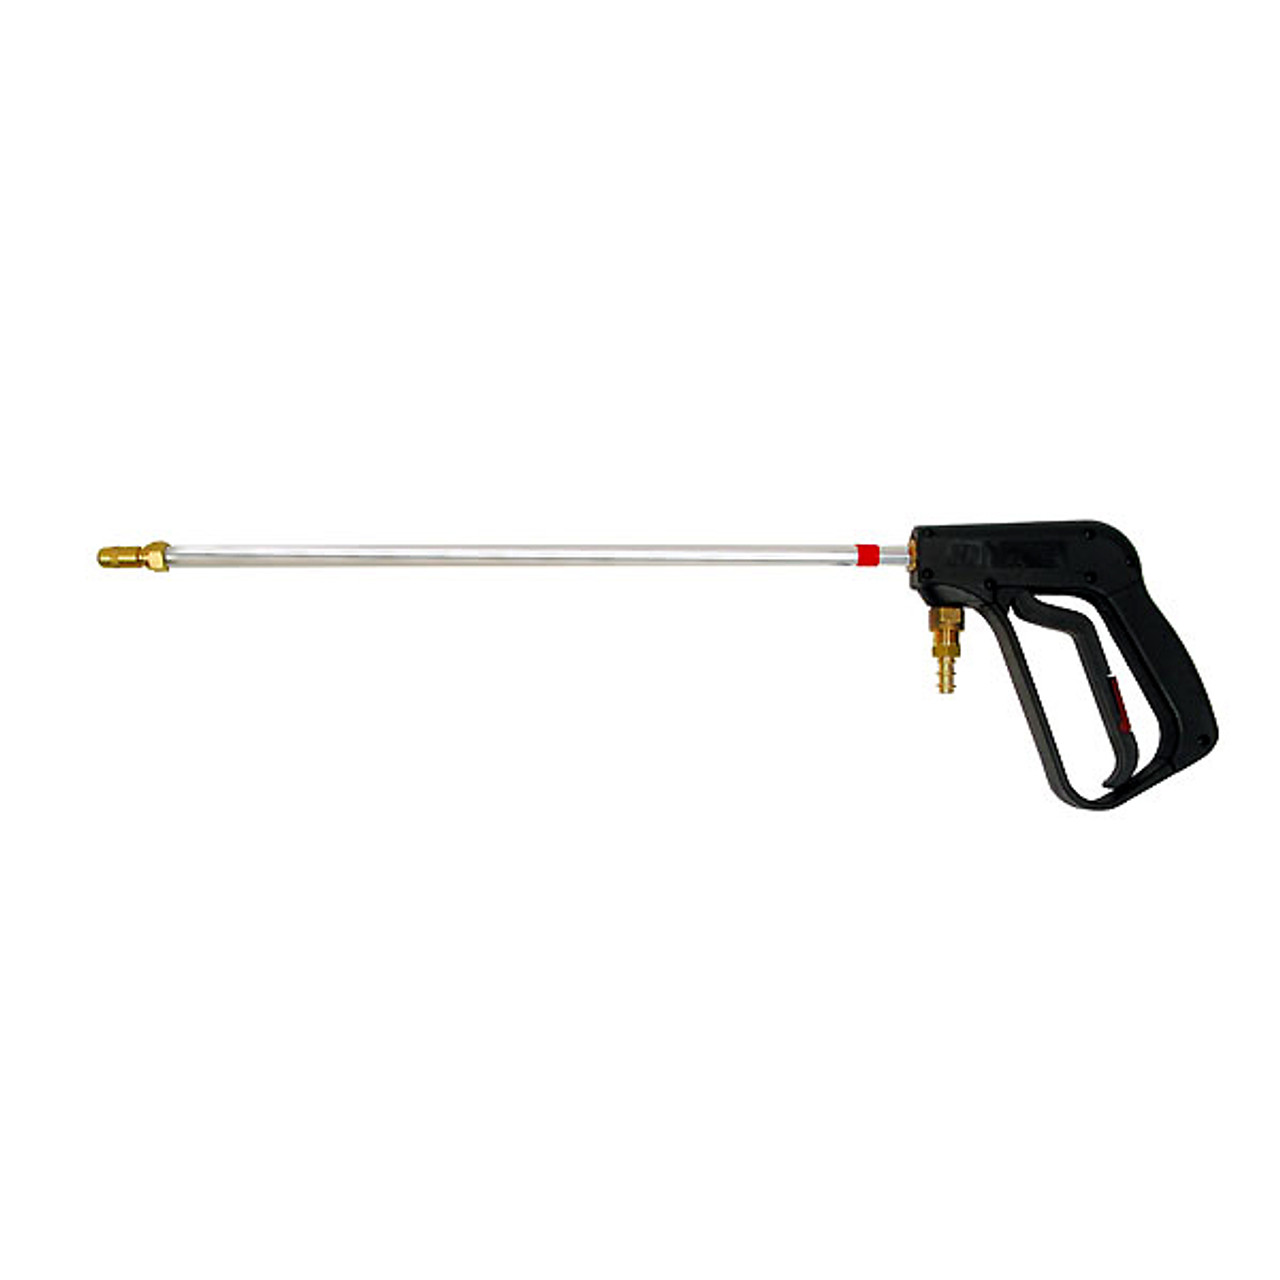 Comet - 24 Heavy Duty Low Pressure Chemical Spray Wand